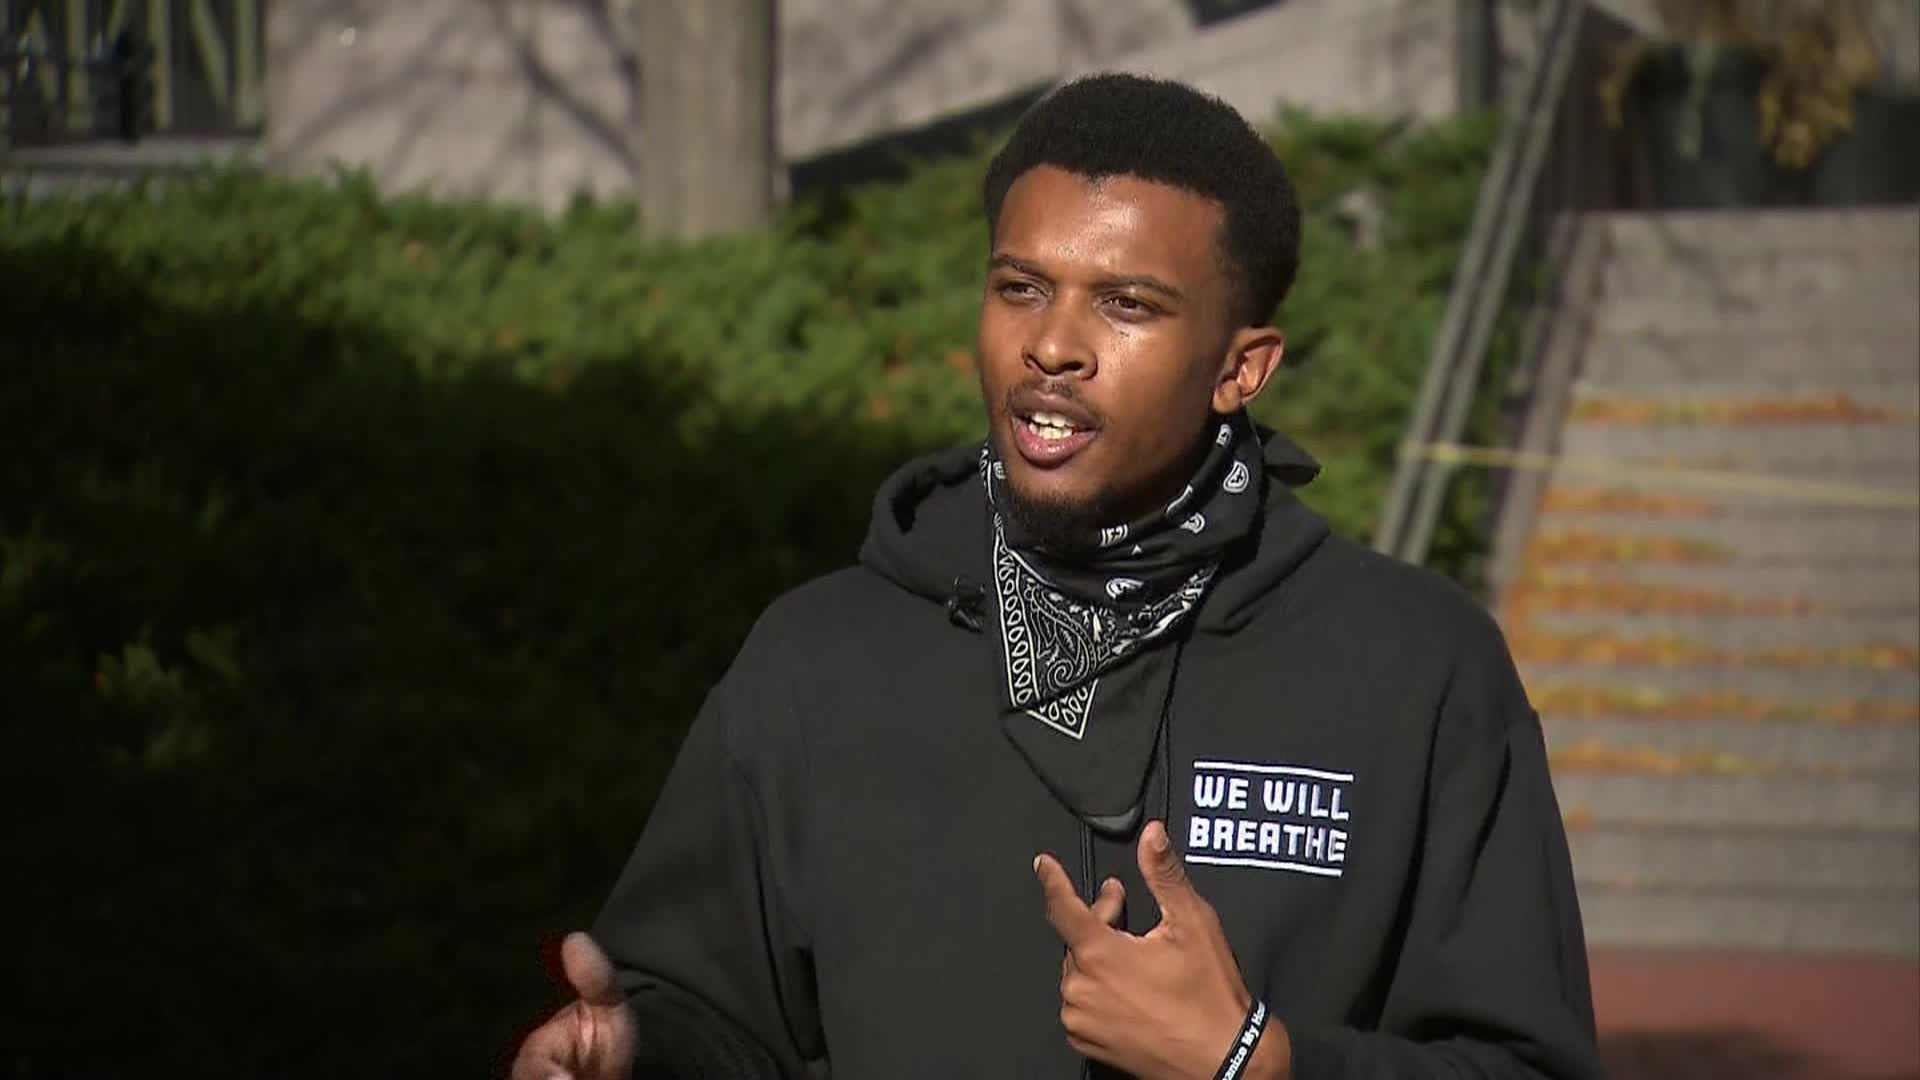 Lewis McCaleb, a 22-year-old first-time voter, speaks with CNN.